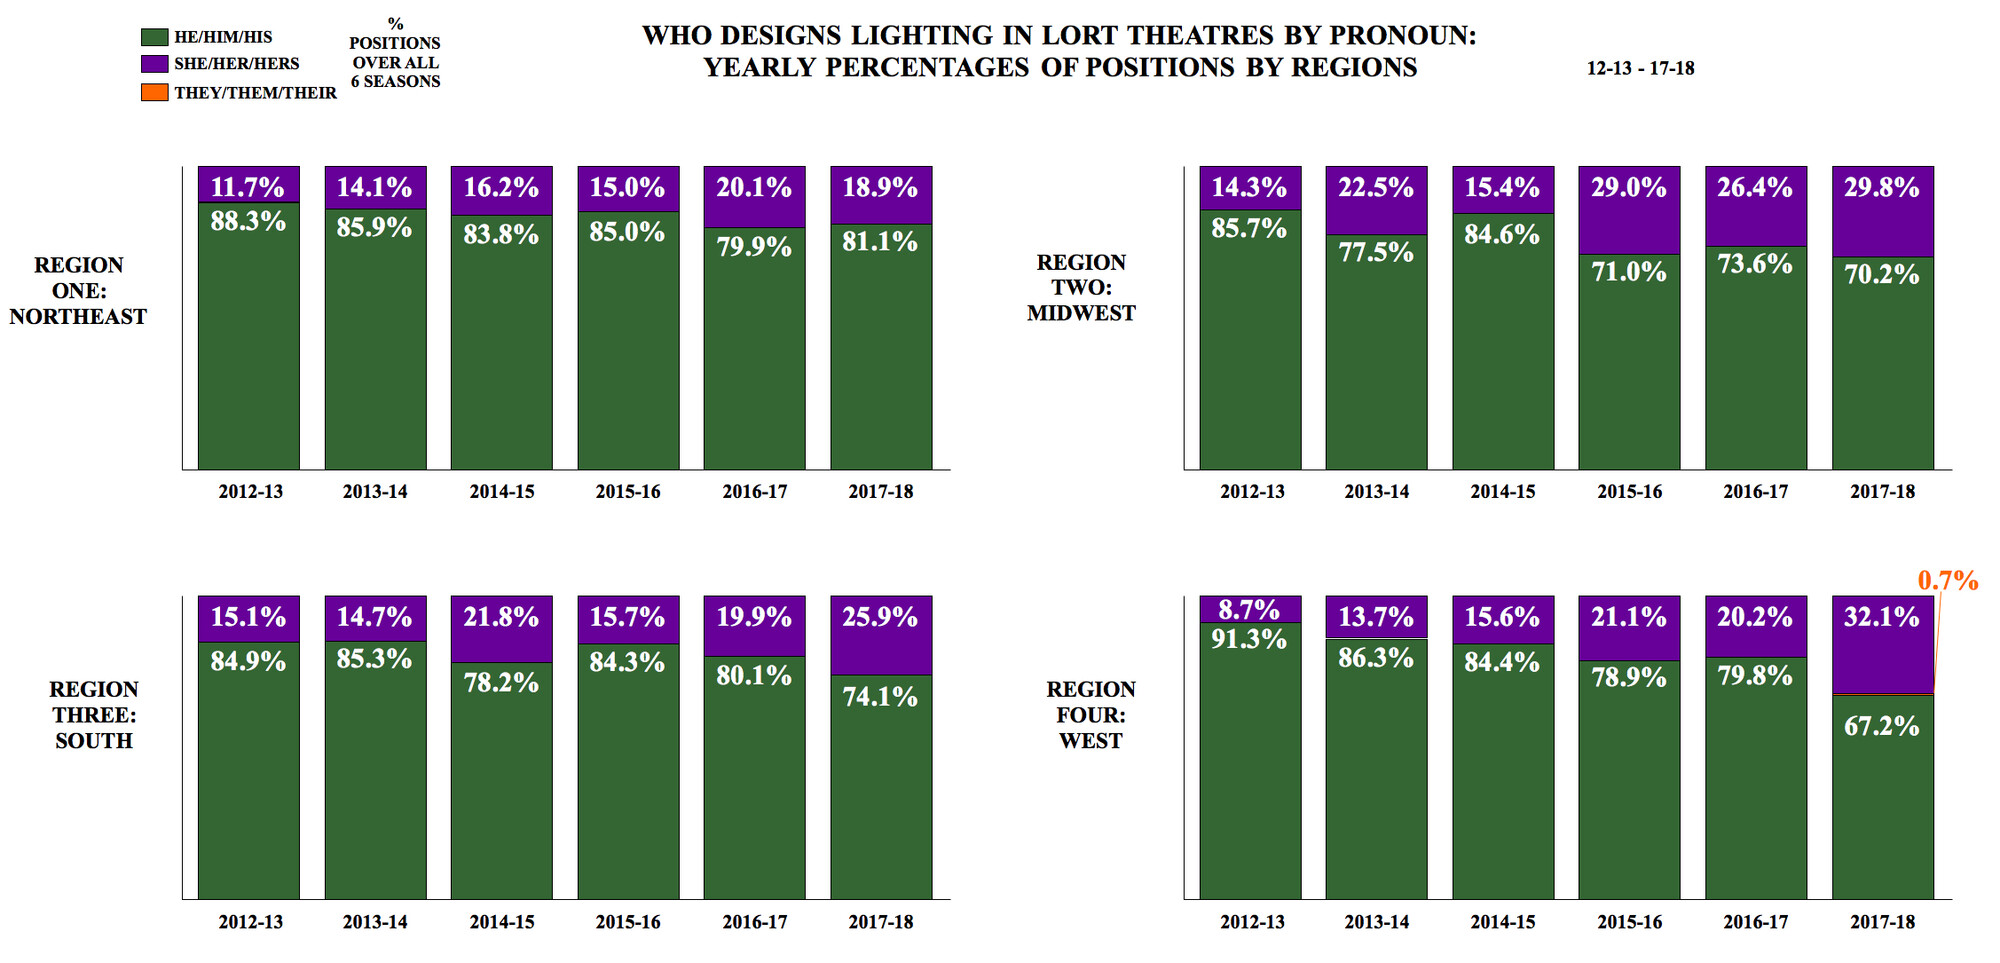 Who Designs Lighting in LORT Theatres by Pronoun: Yearly Percentages of Positions by Regions